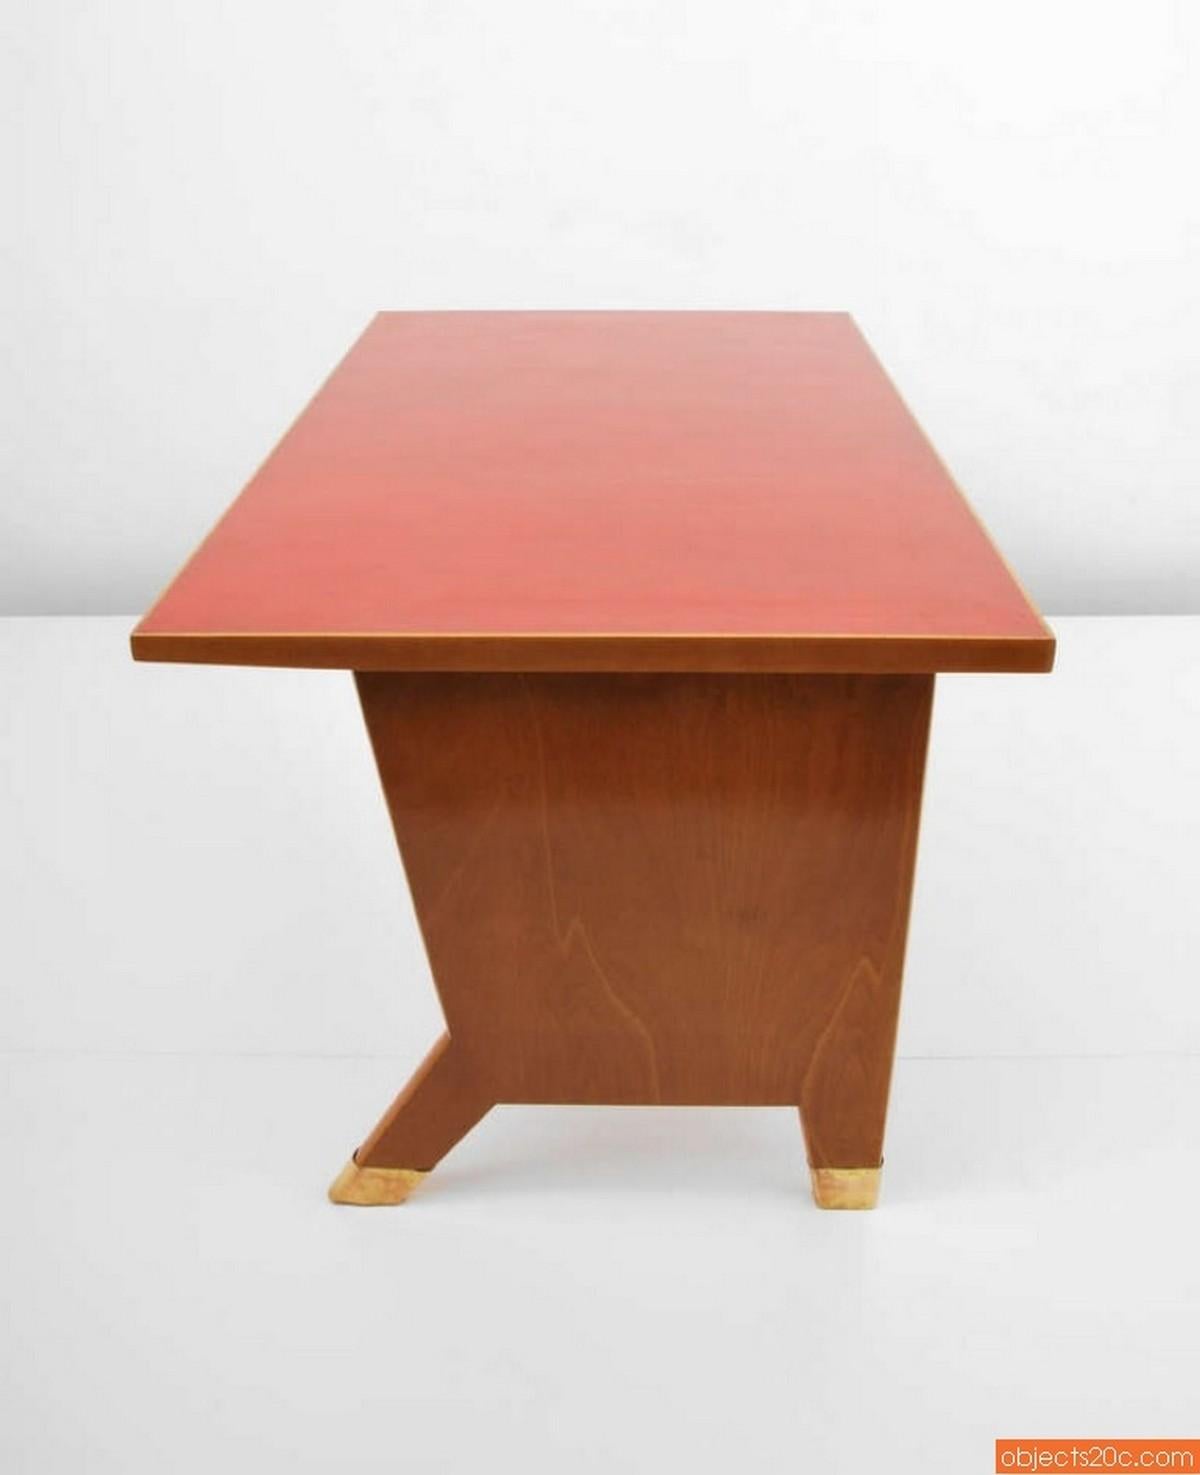 Rare Gio Ponti Desk and Wall Shelf, Forli Administrative Offices In Good Condition For Sale In Lake Worth Beach, FL